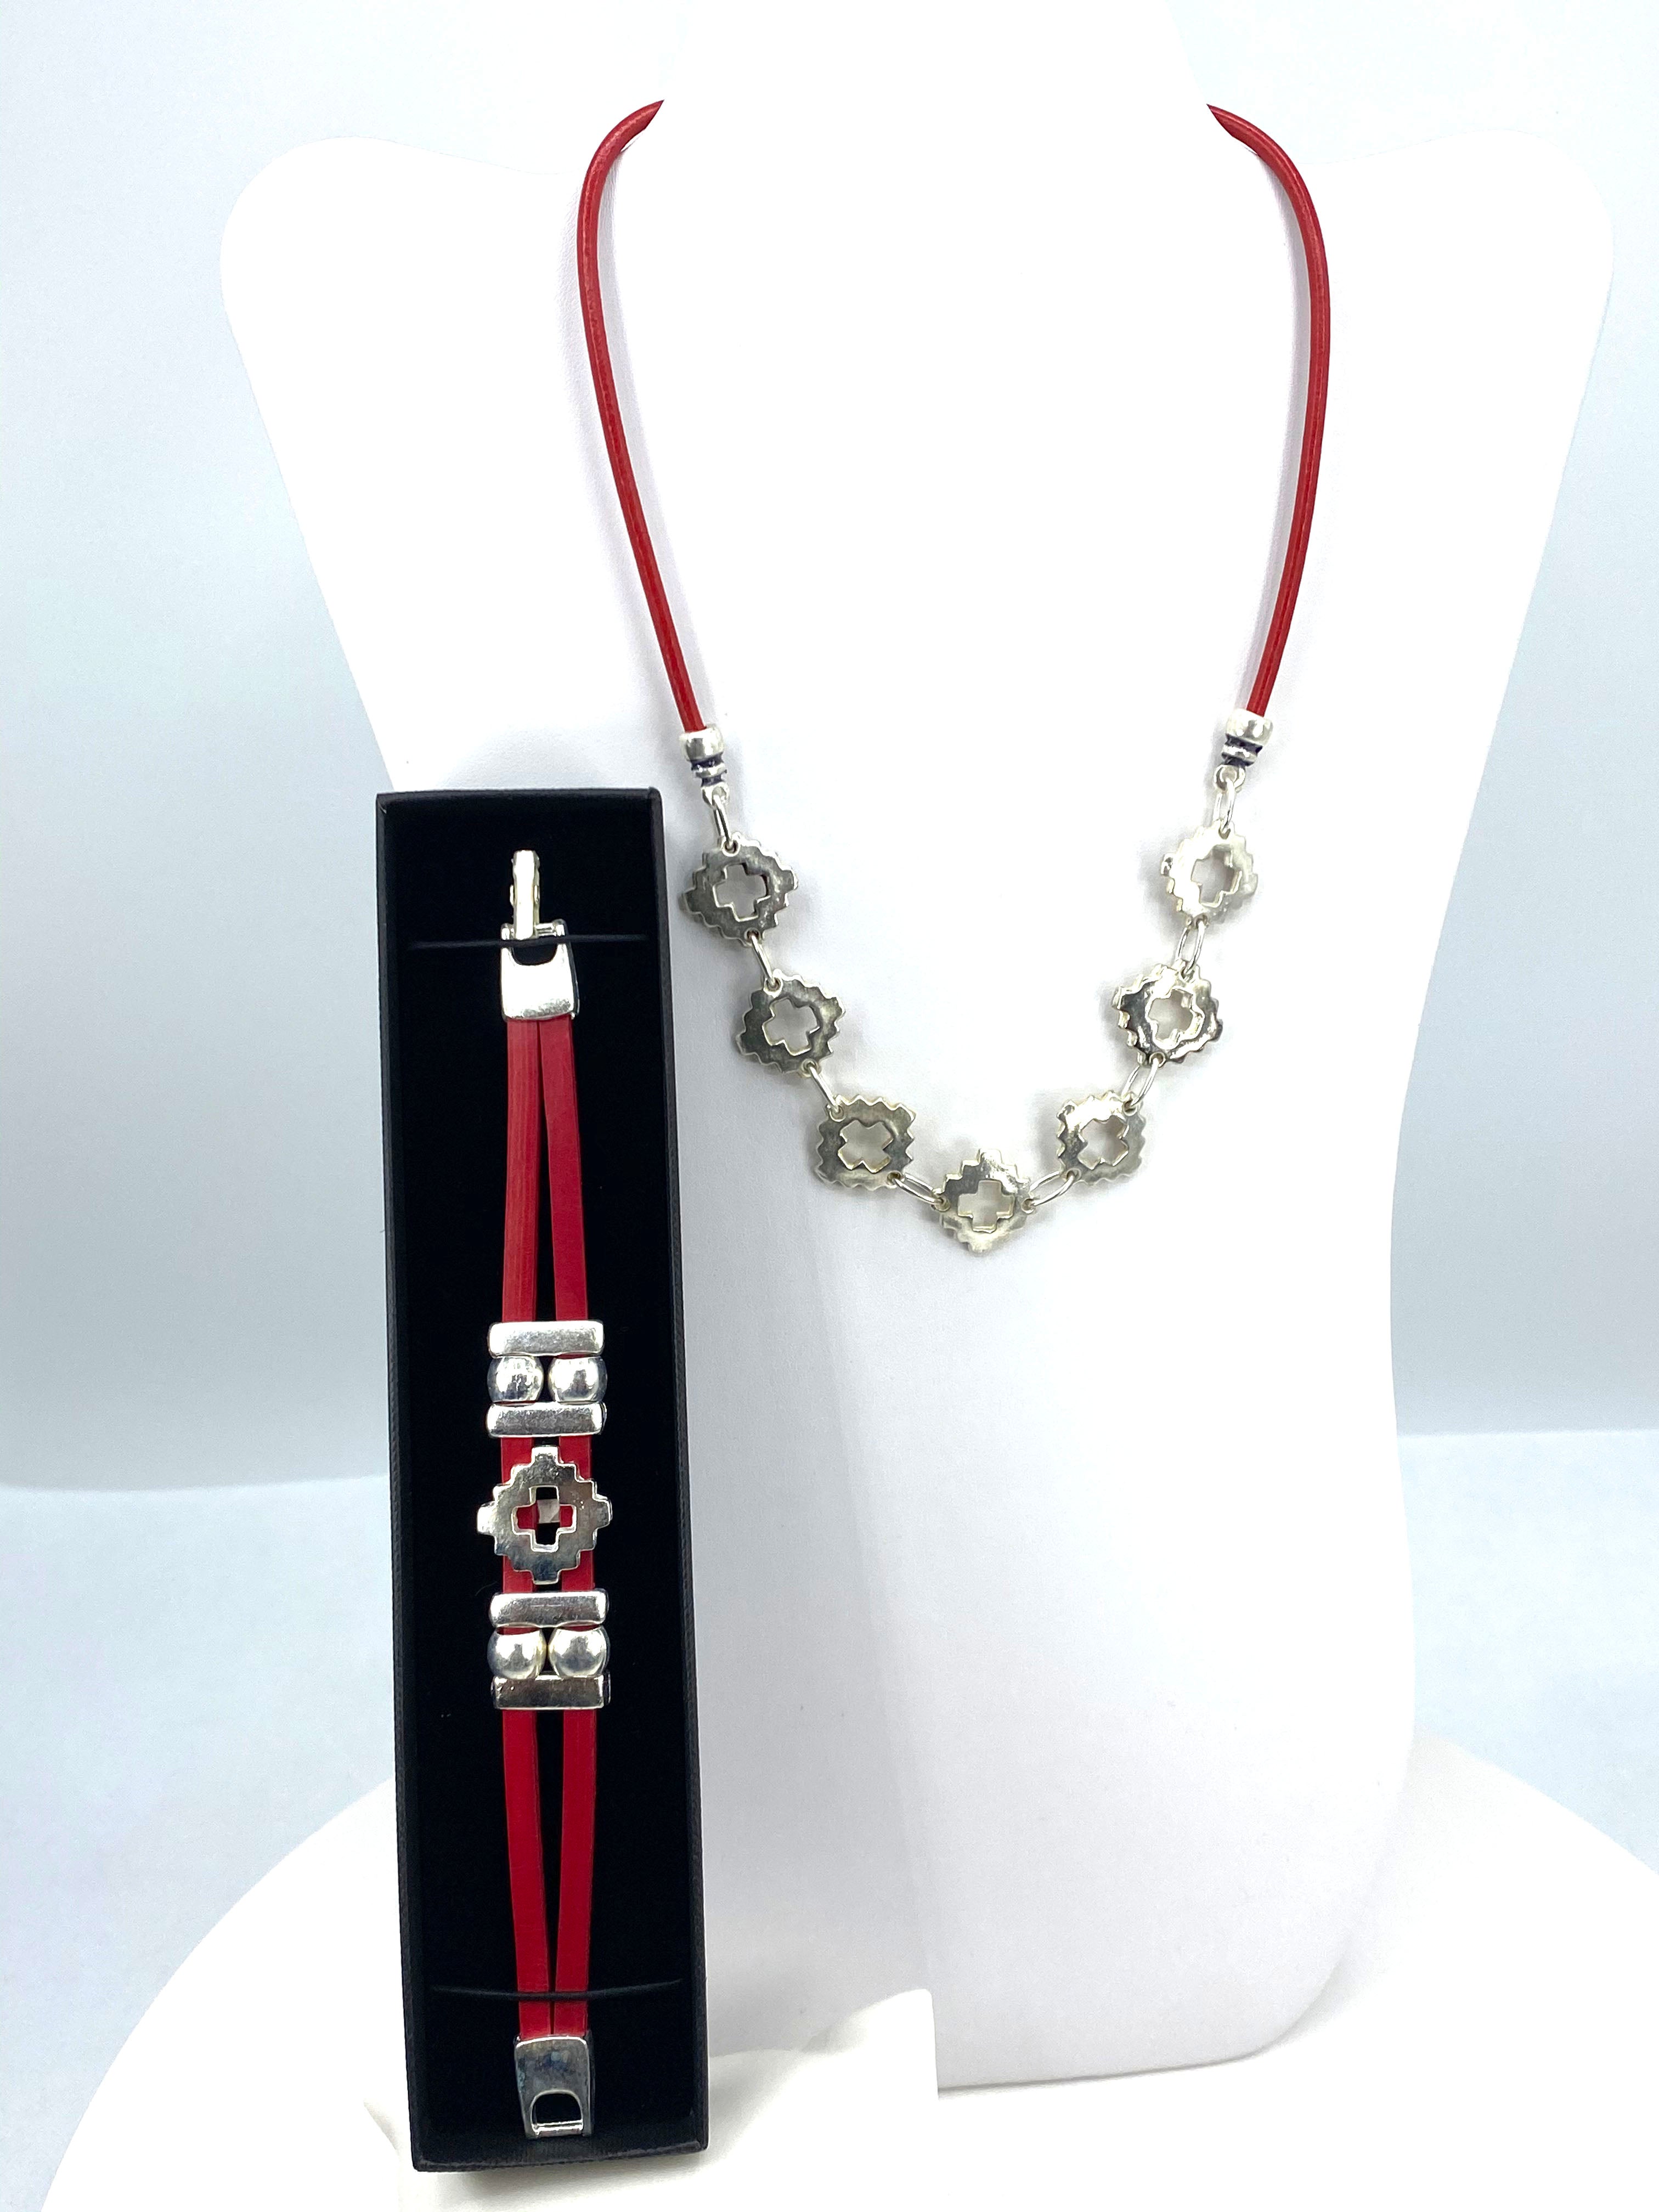 Vintage Cross Necklace and Bracelet Set  Handmade Jewelry in Argentina  with Genuine Leather Strap by Graciela's Collection